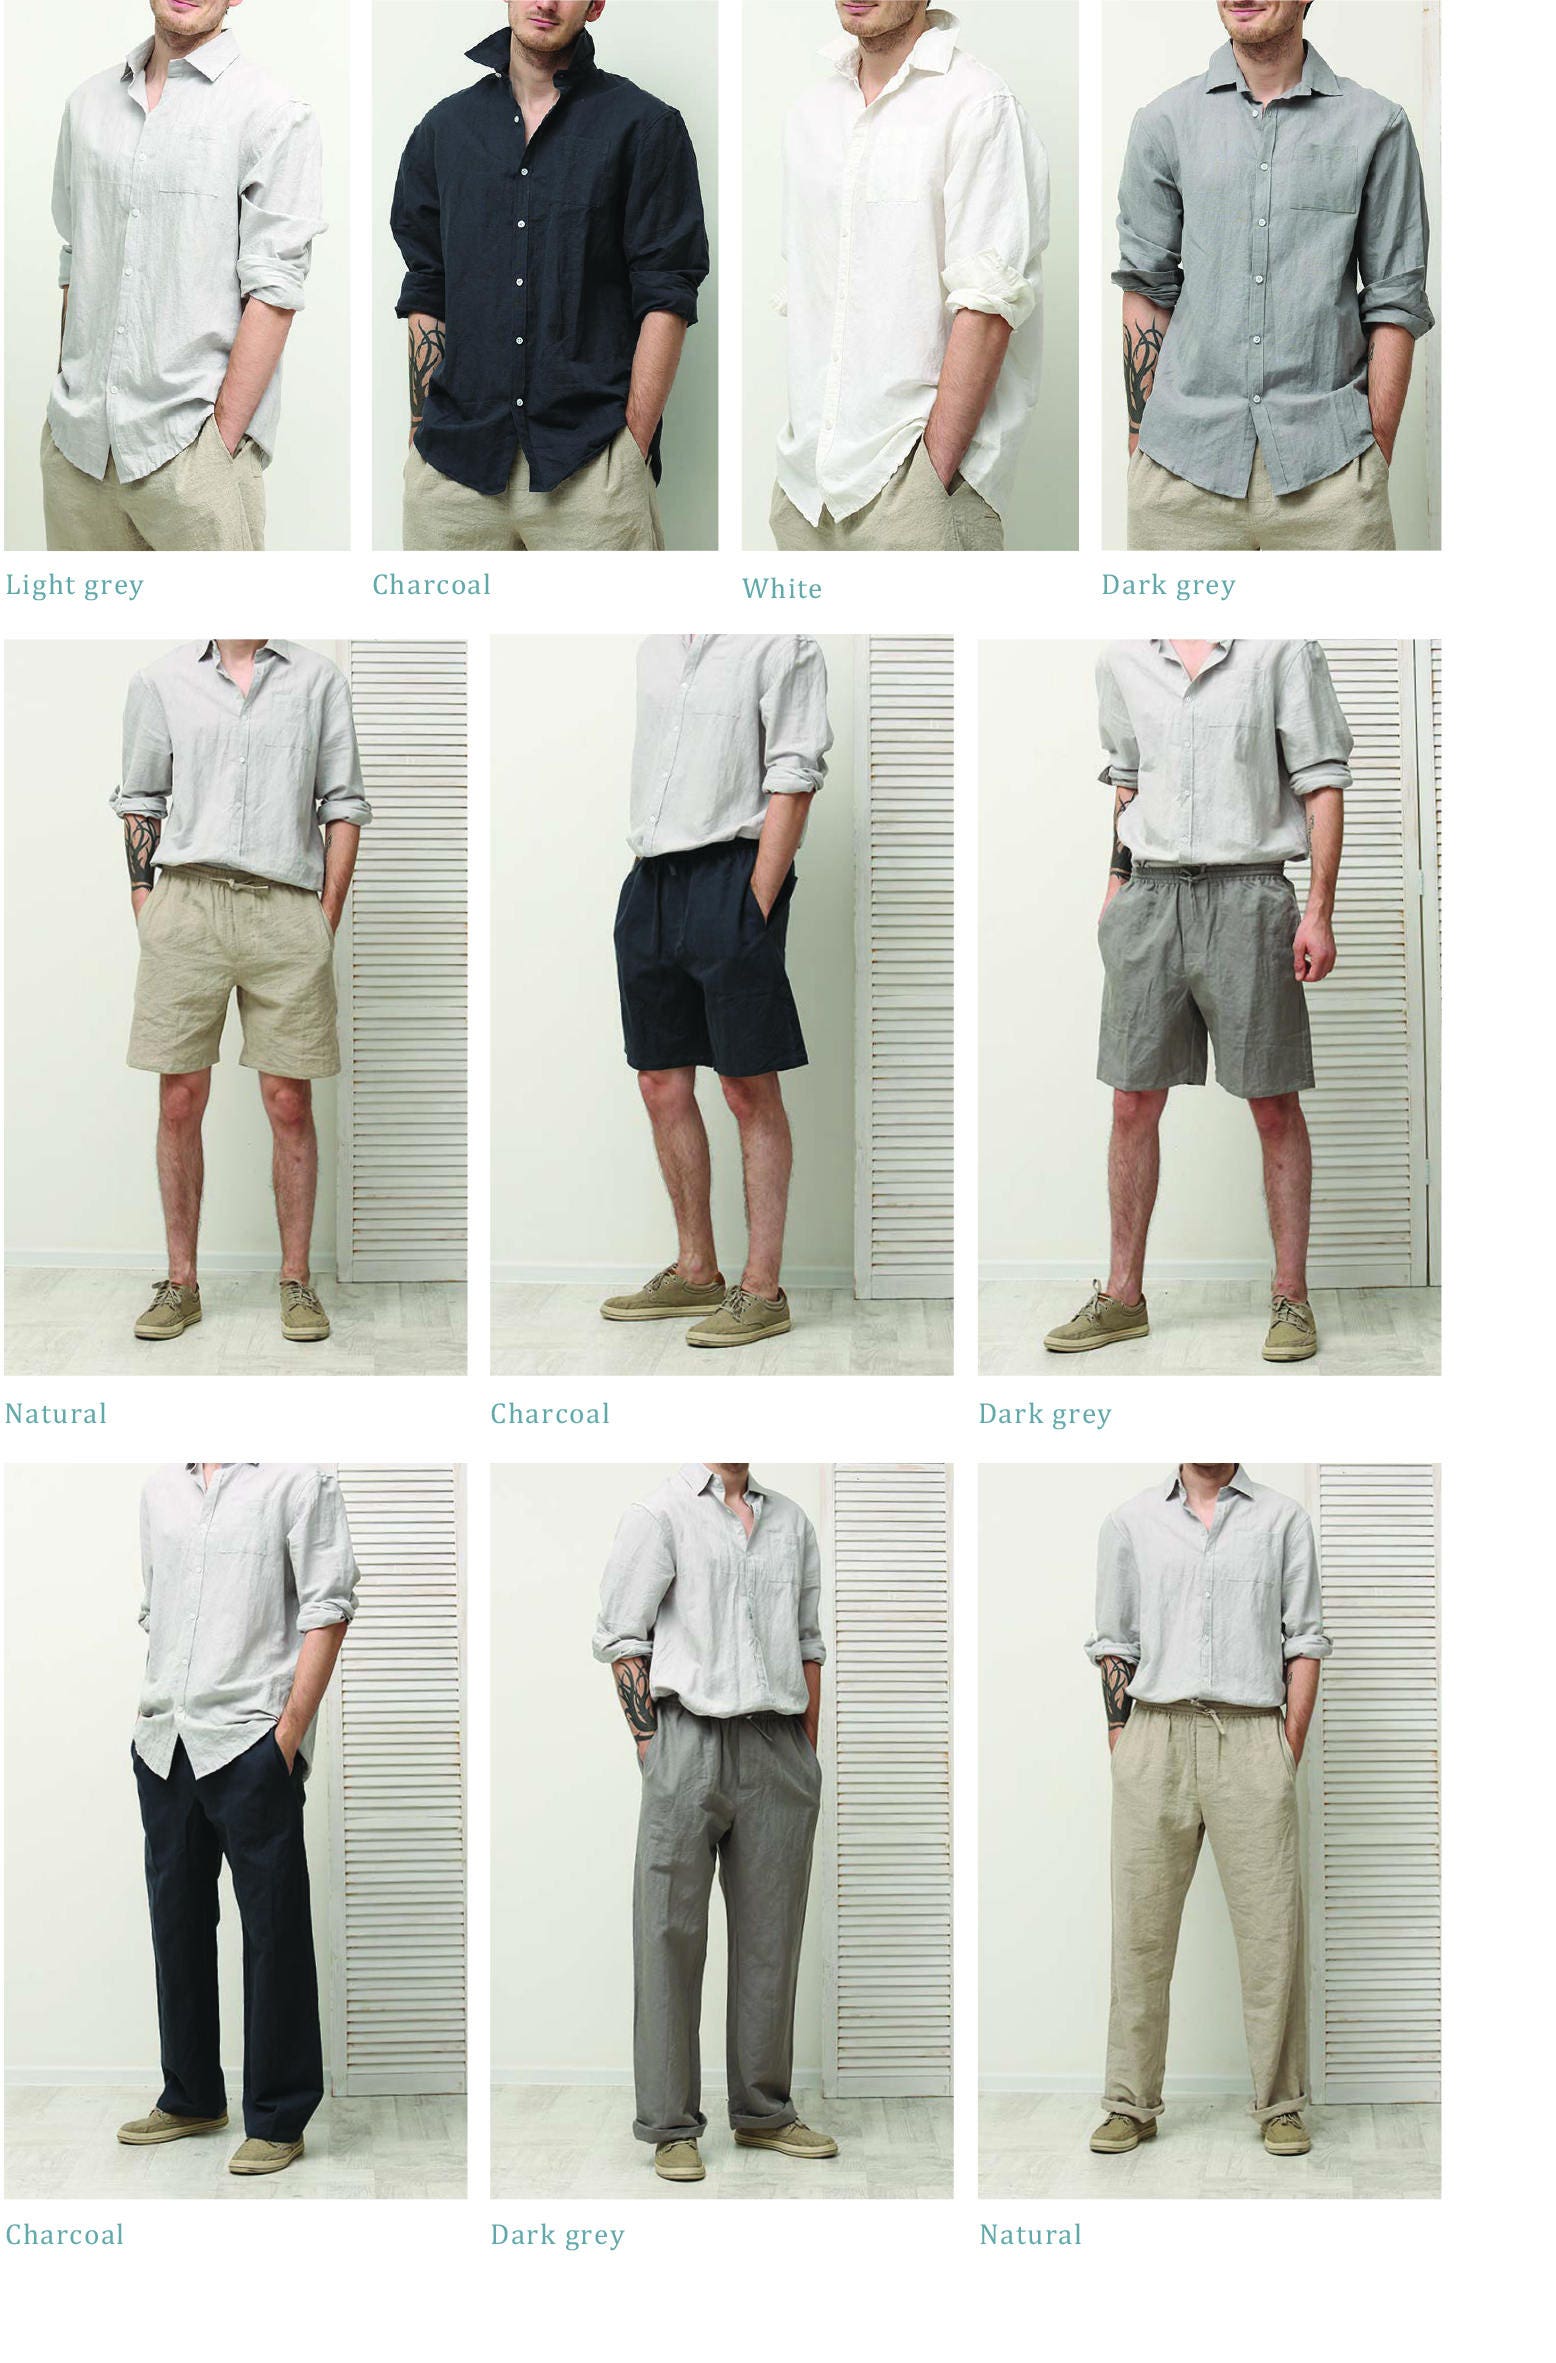 Detail of the spacious pockets and stylish design of the Linen Shorts.